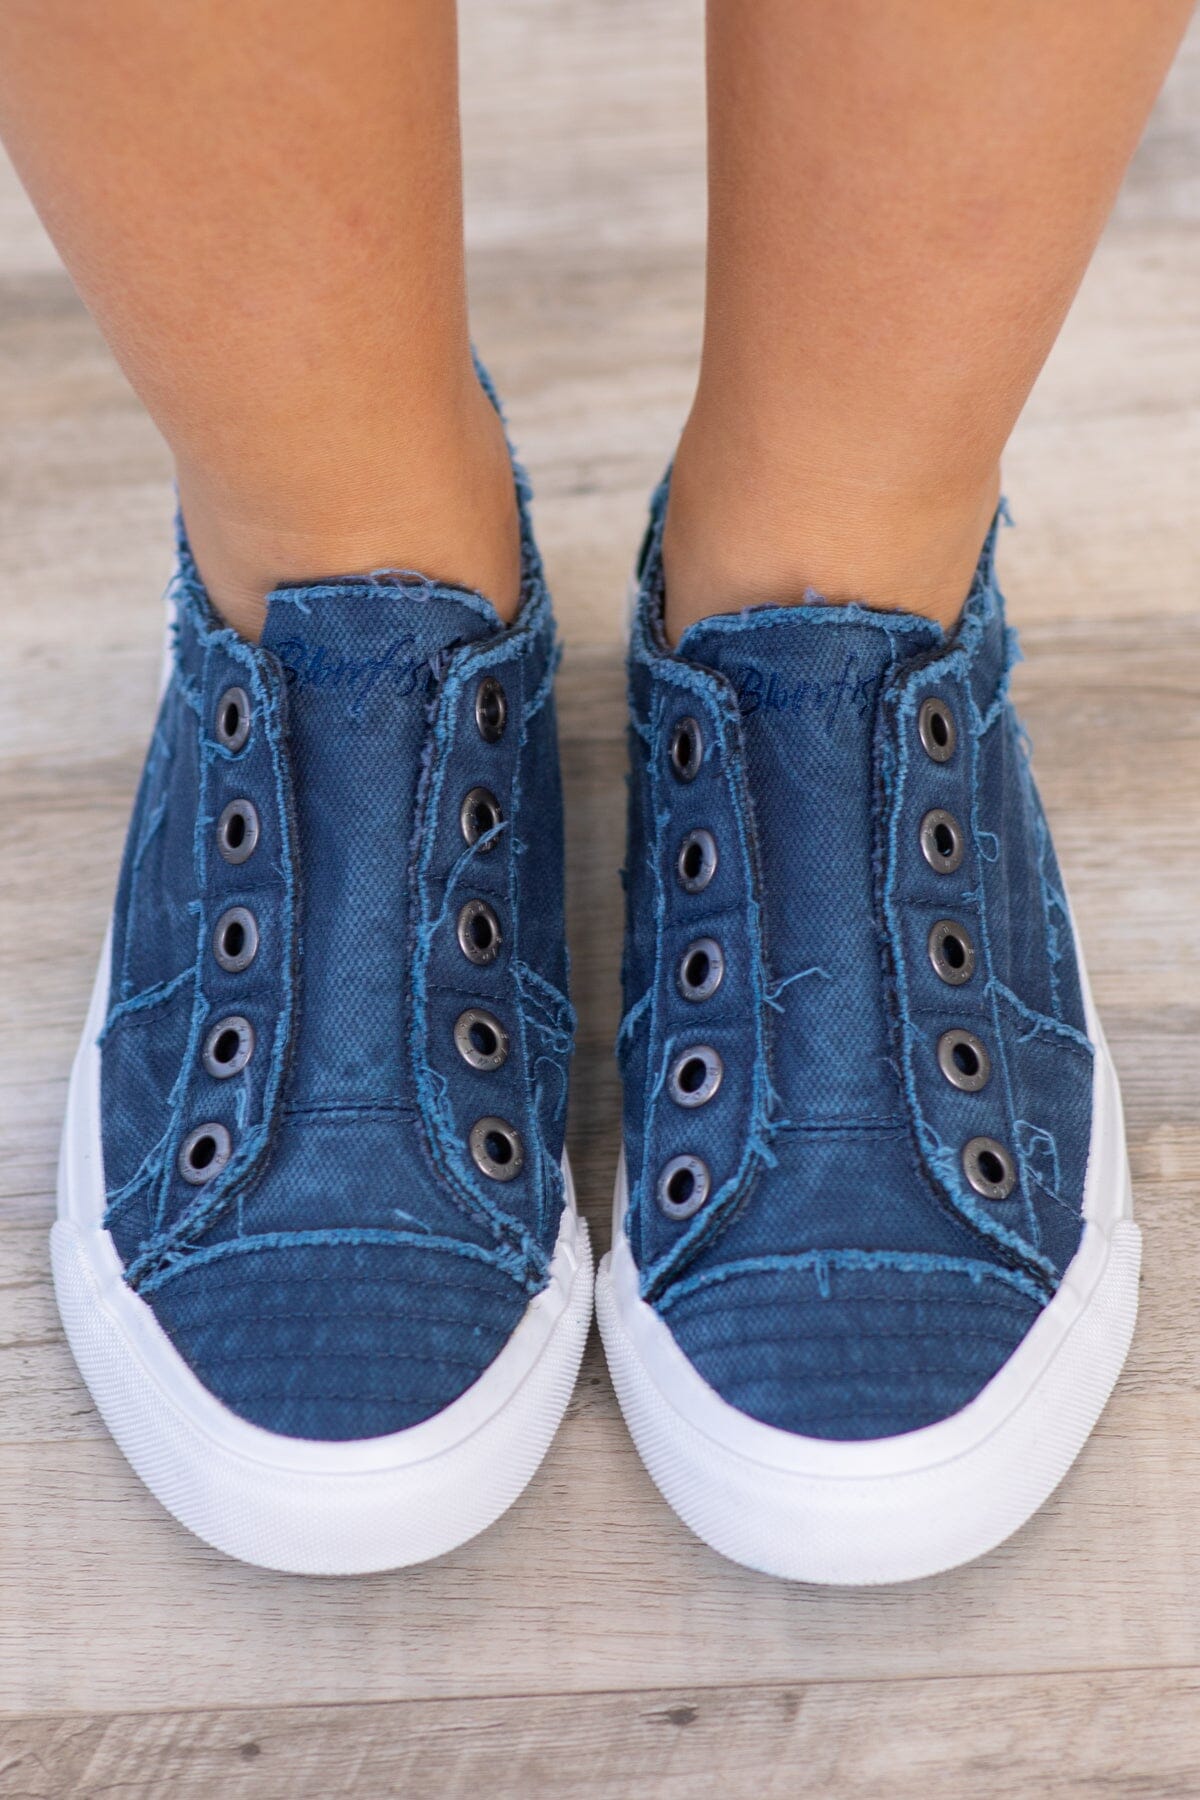 Navy Slip On Sneakers - Filly Flair